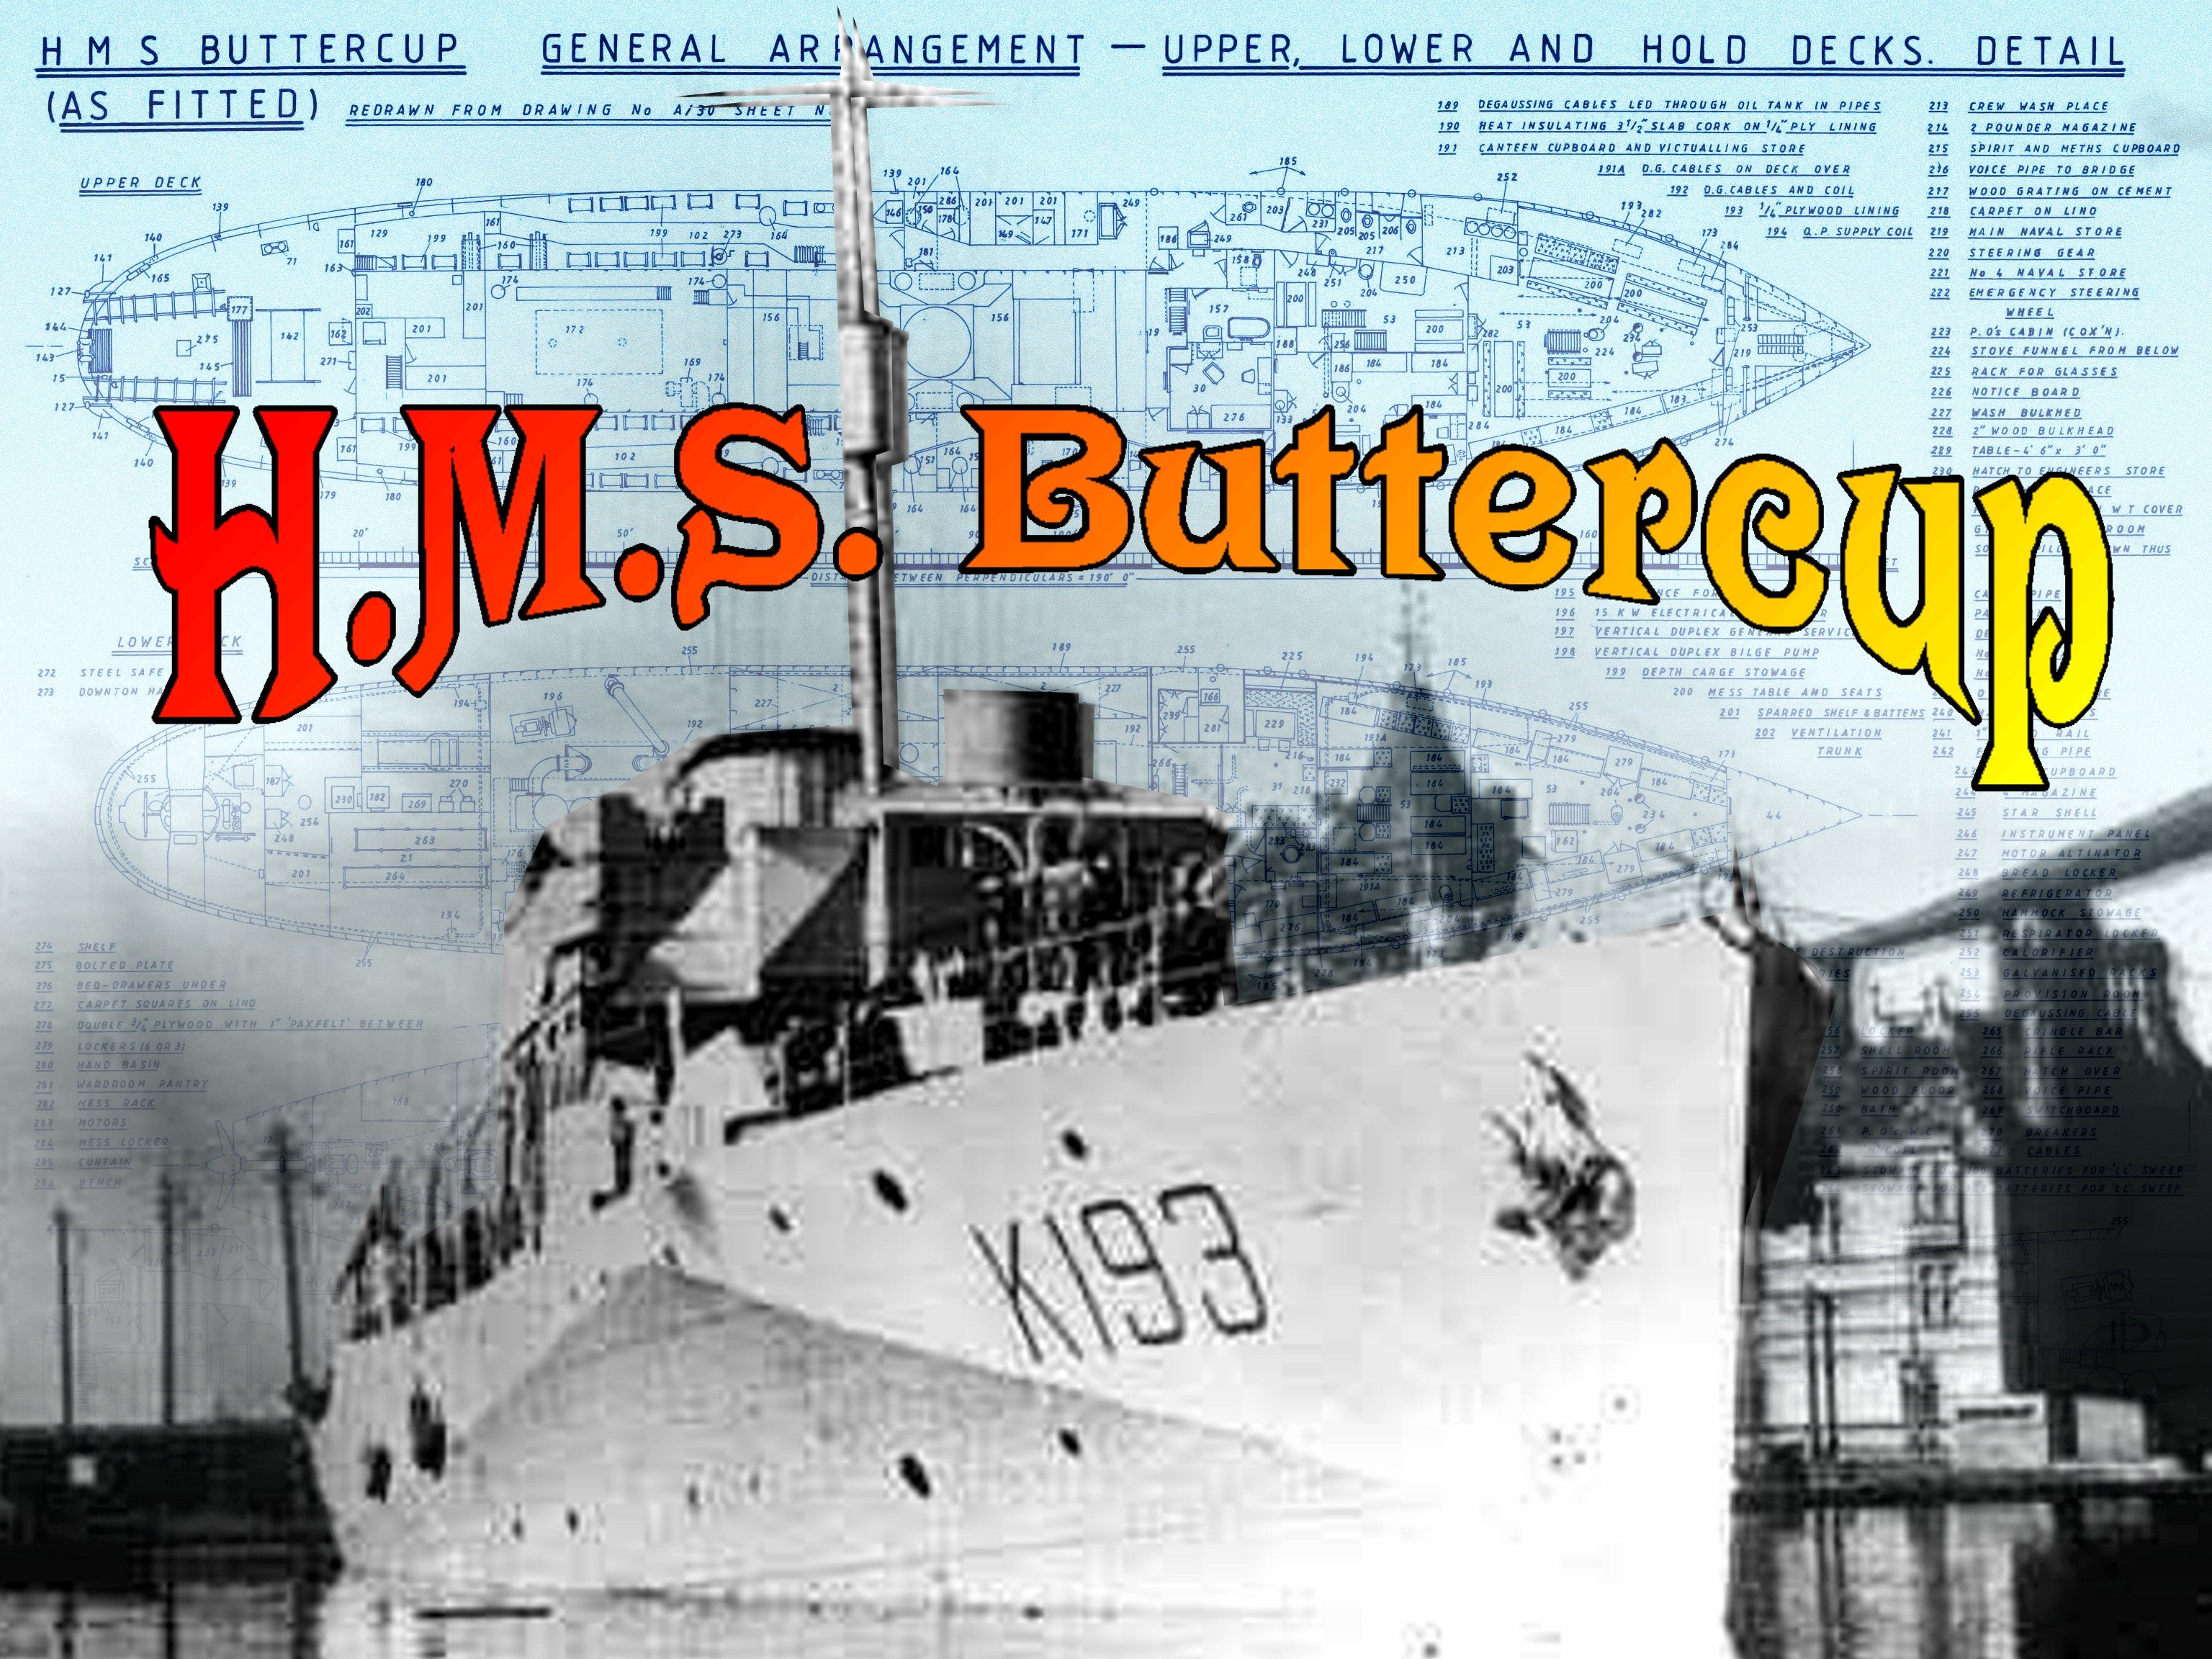 listing is for scale drawings h.m.s. buttercup corvette, flower class - k.193  scale 1:96